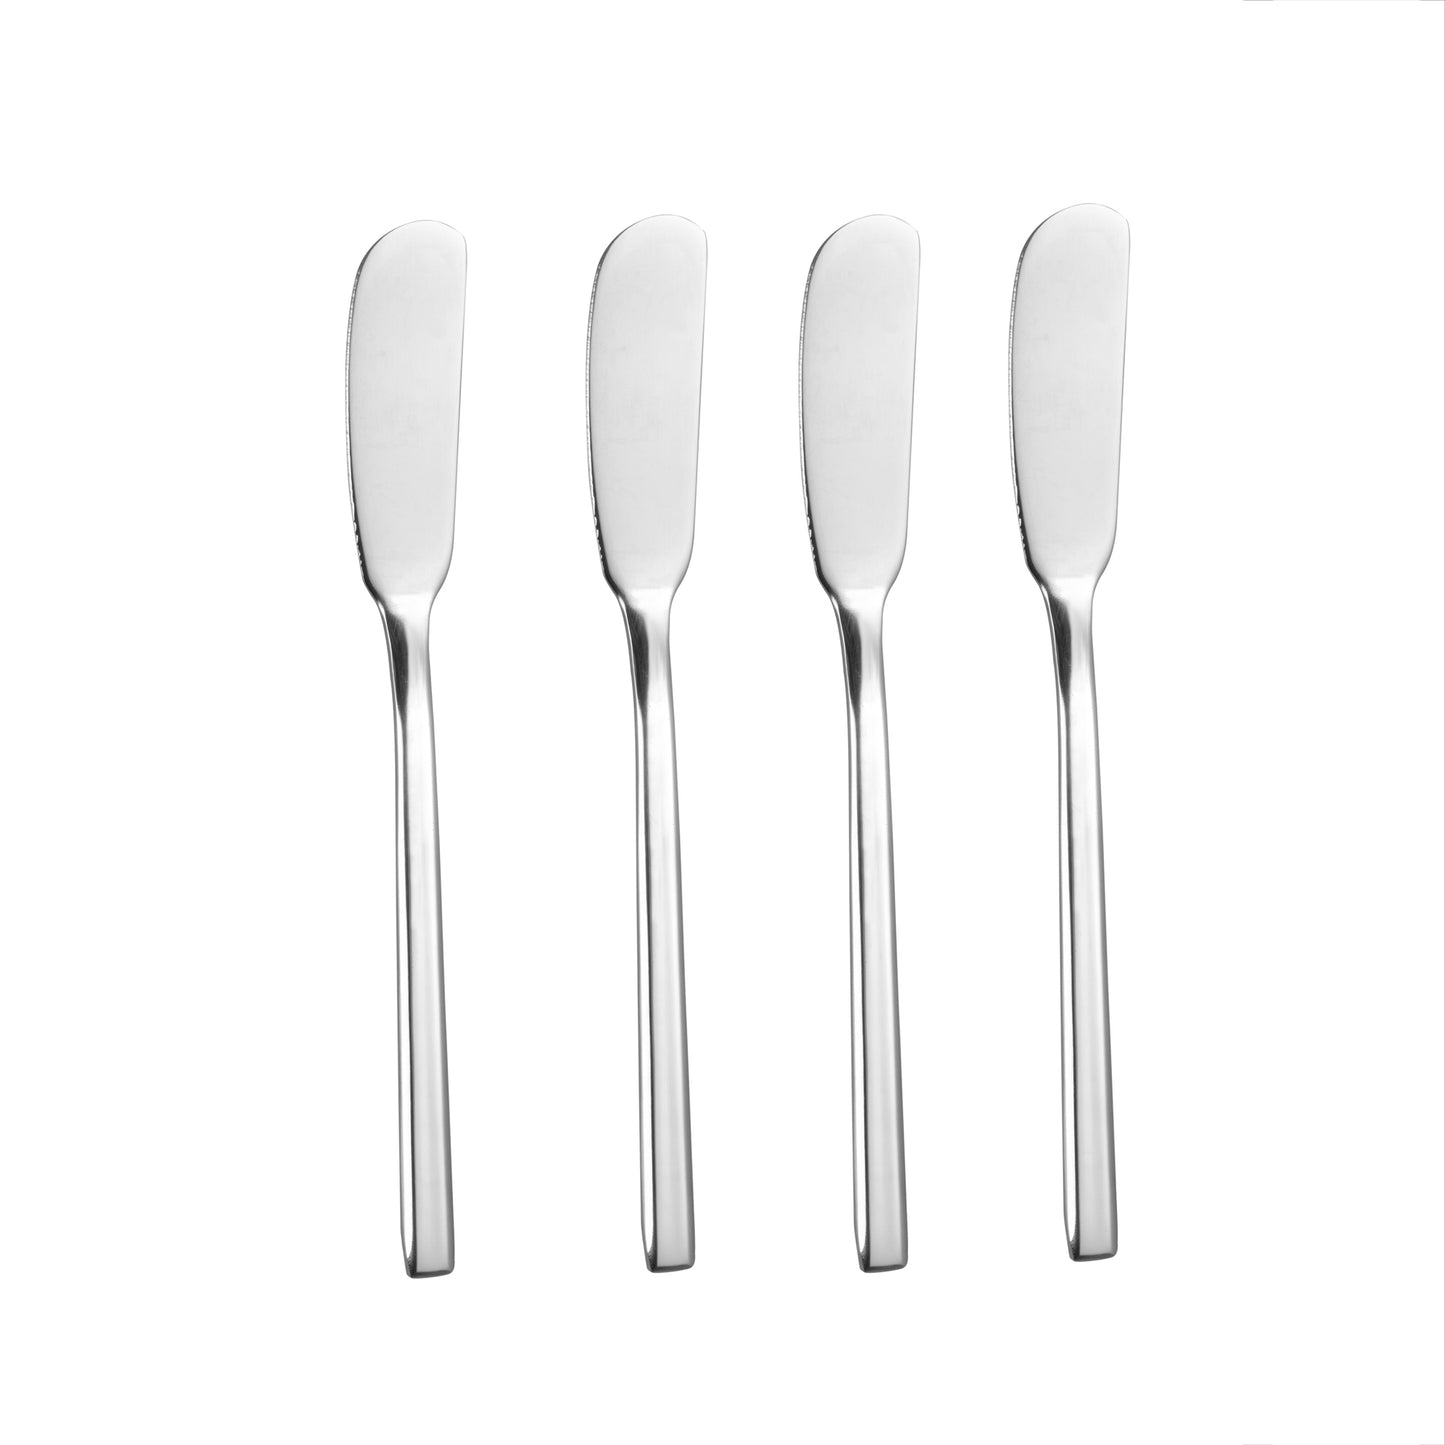 IMEEA Butter Knife Stainless Steel Butter Spreader 6.5-Inch, Set of 4